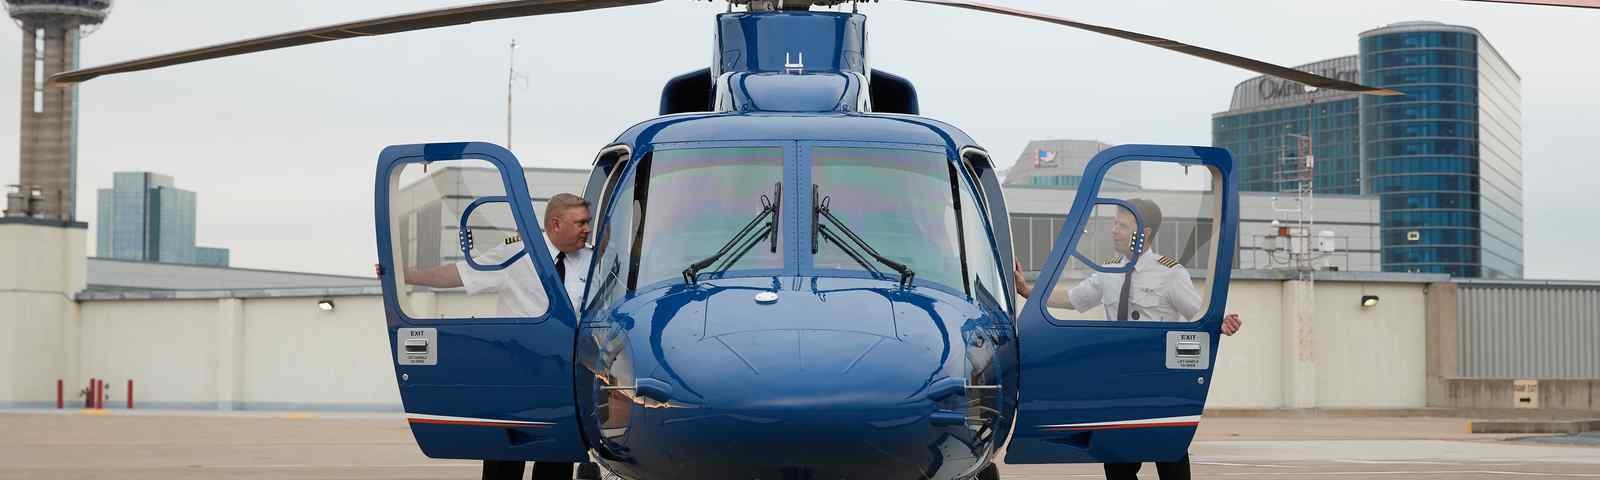 Sikorsky S-76D Executive Helicopter Charter - Dallas, Texas